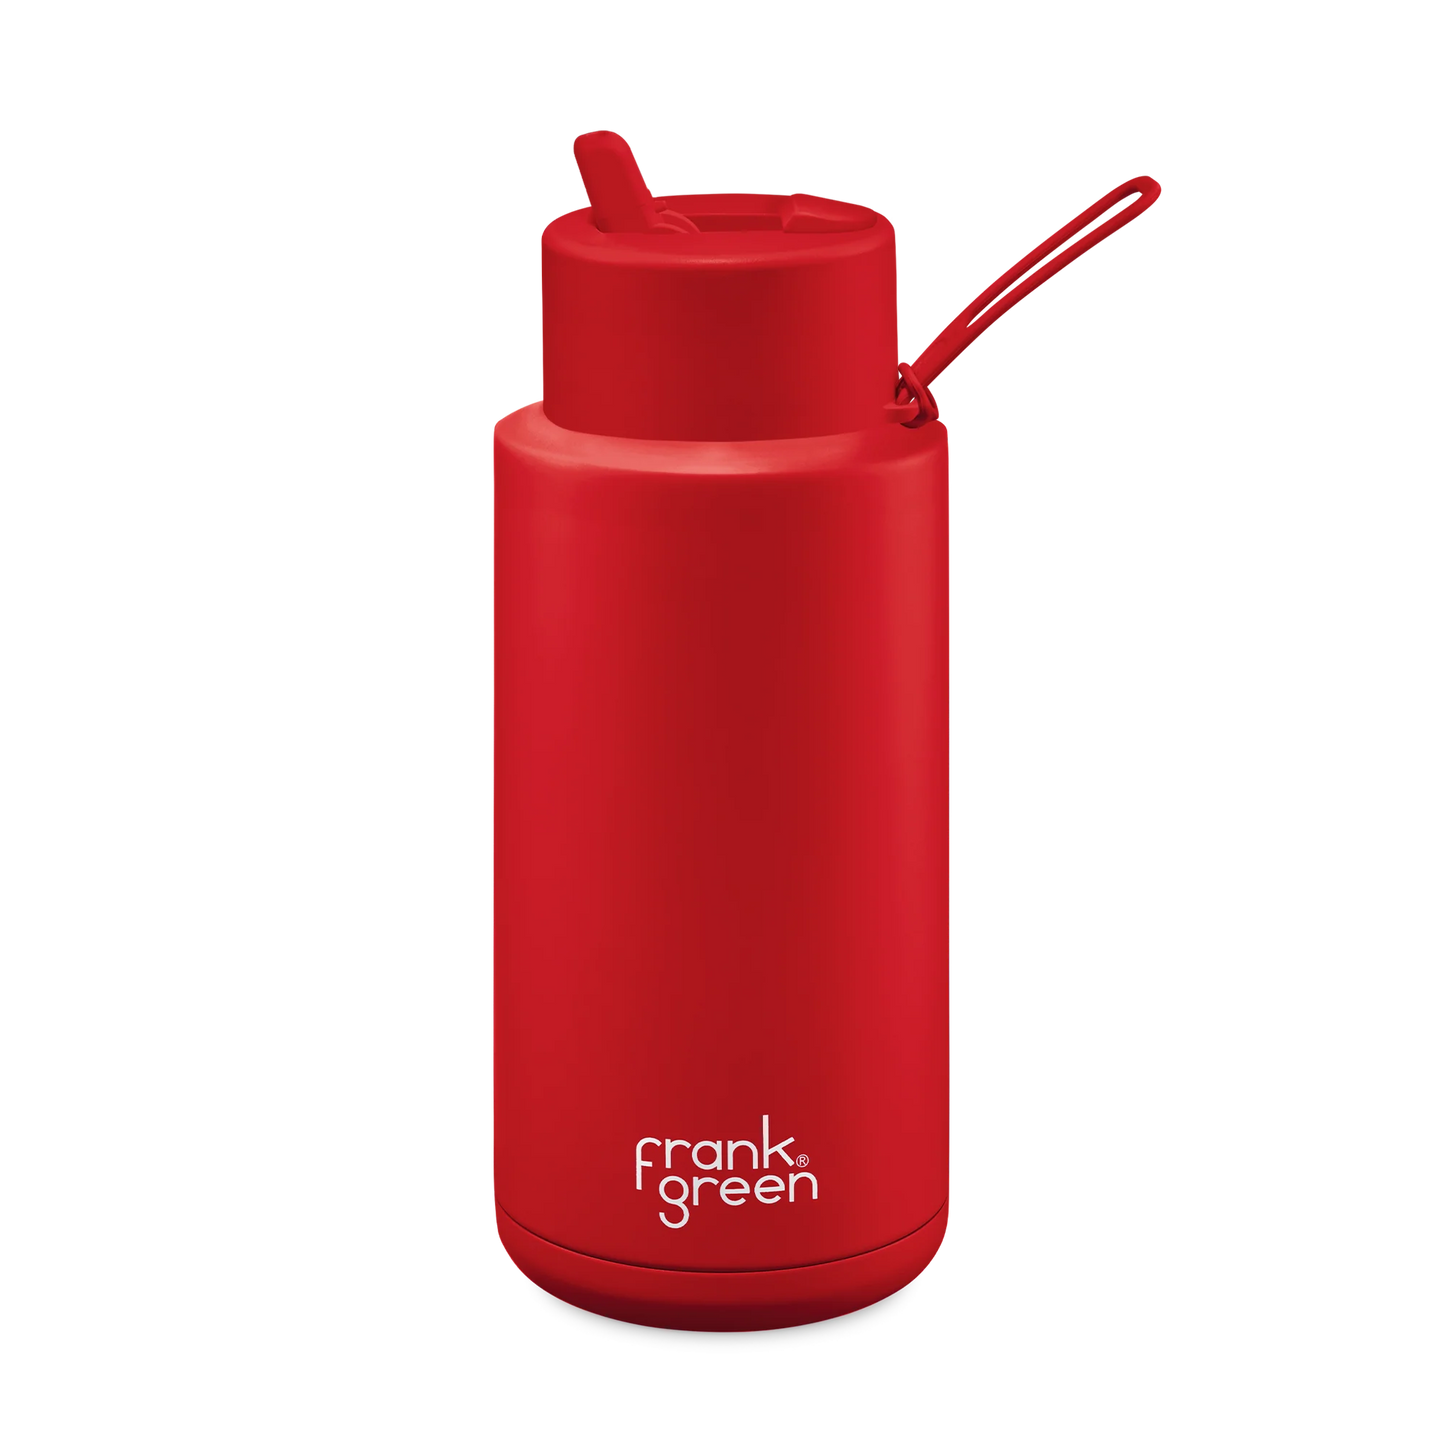 LIMITED EDITION CERAMIC REUSABLE BOTTLE (1L) - ATOMIC RED